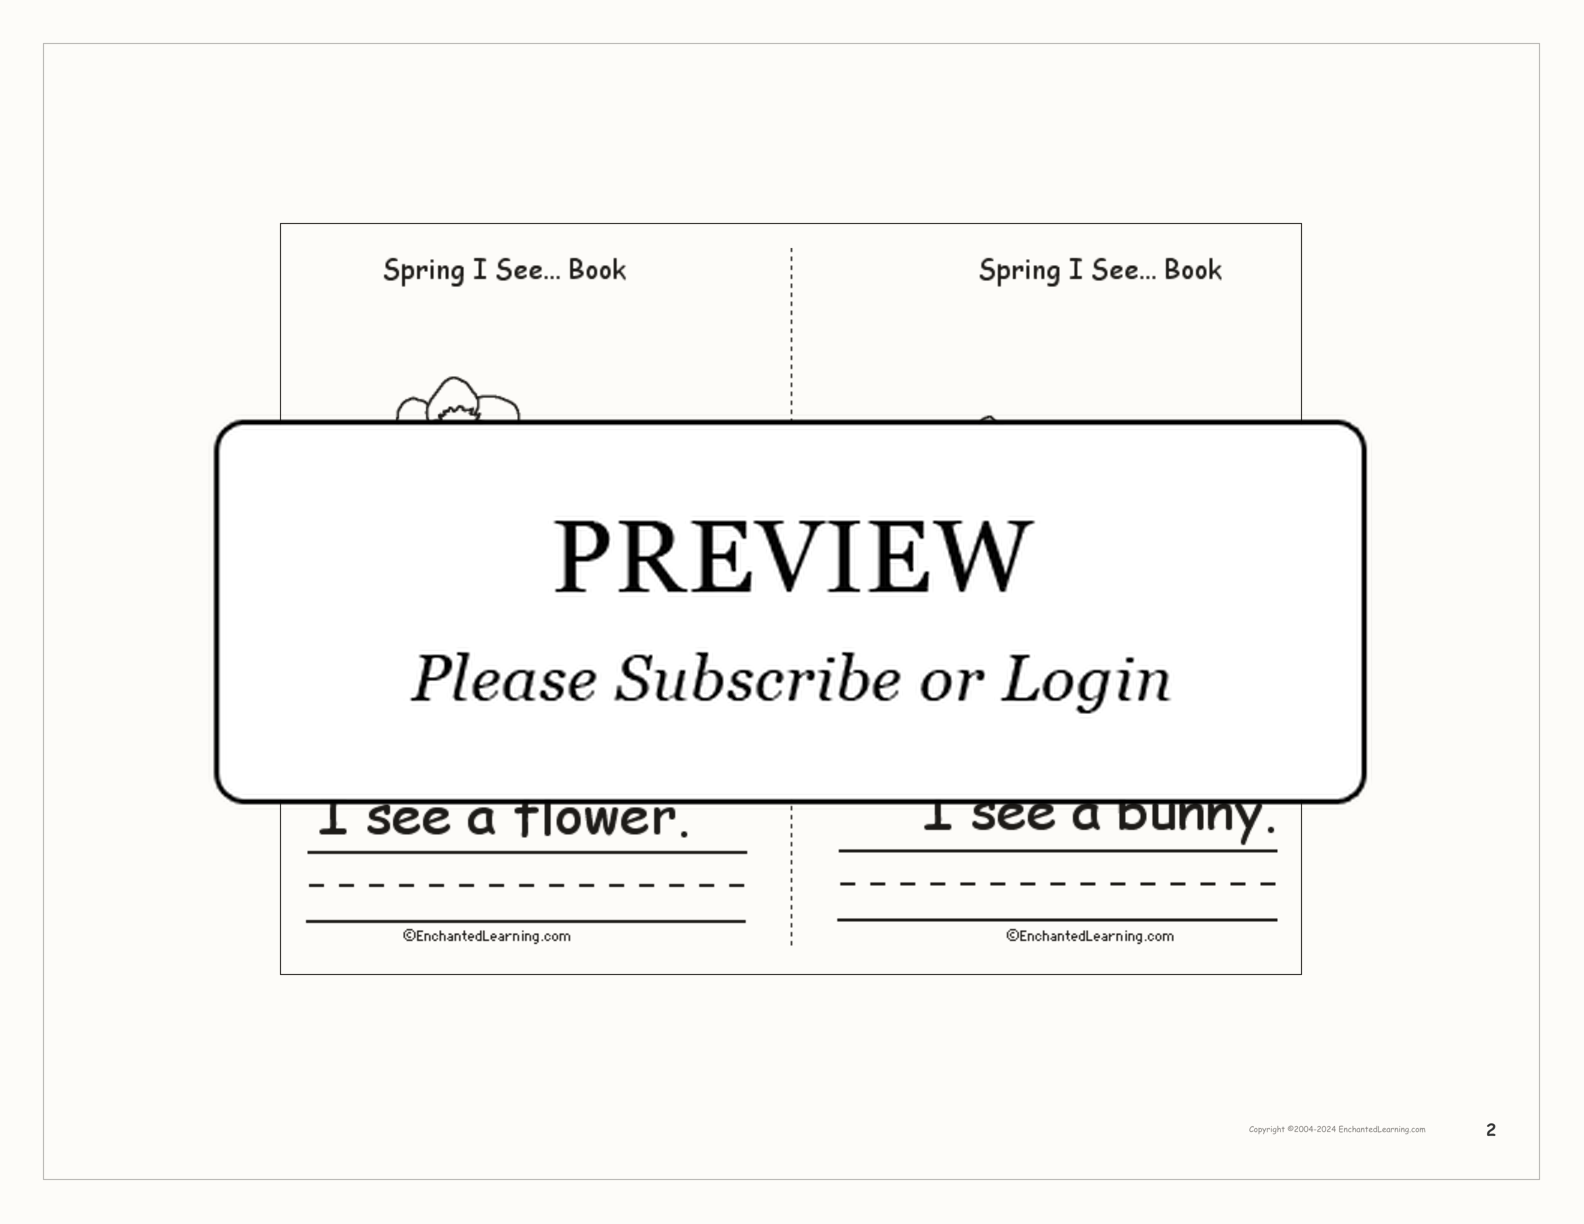 Spring I See... A Printable Book interactive worksheet page 2